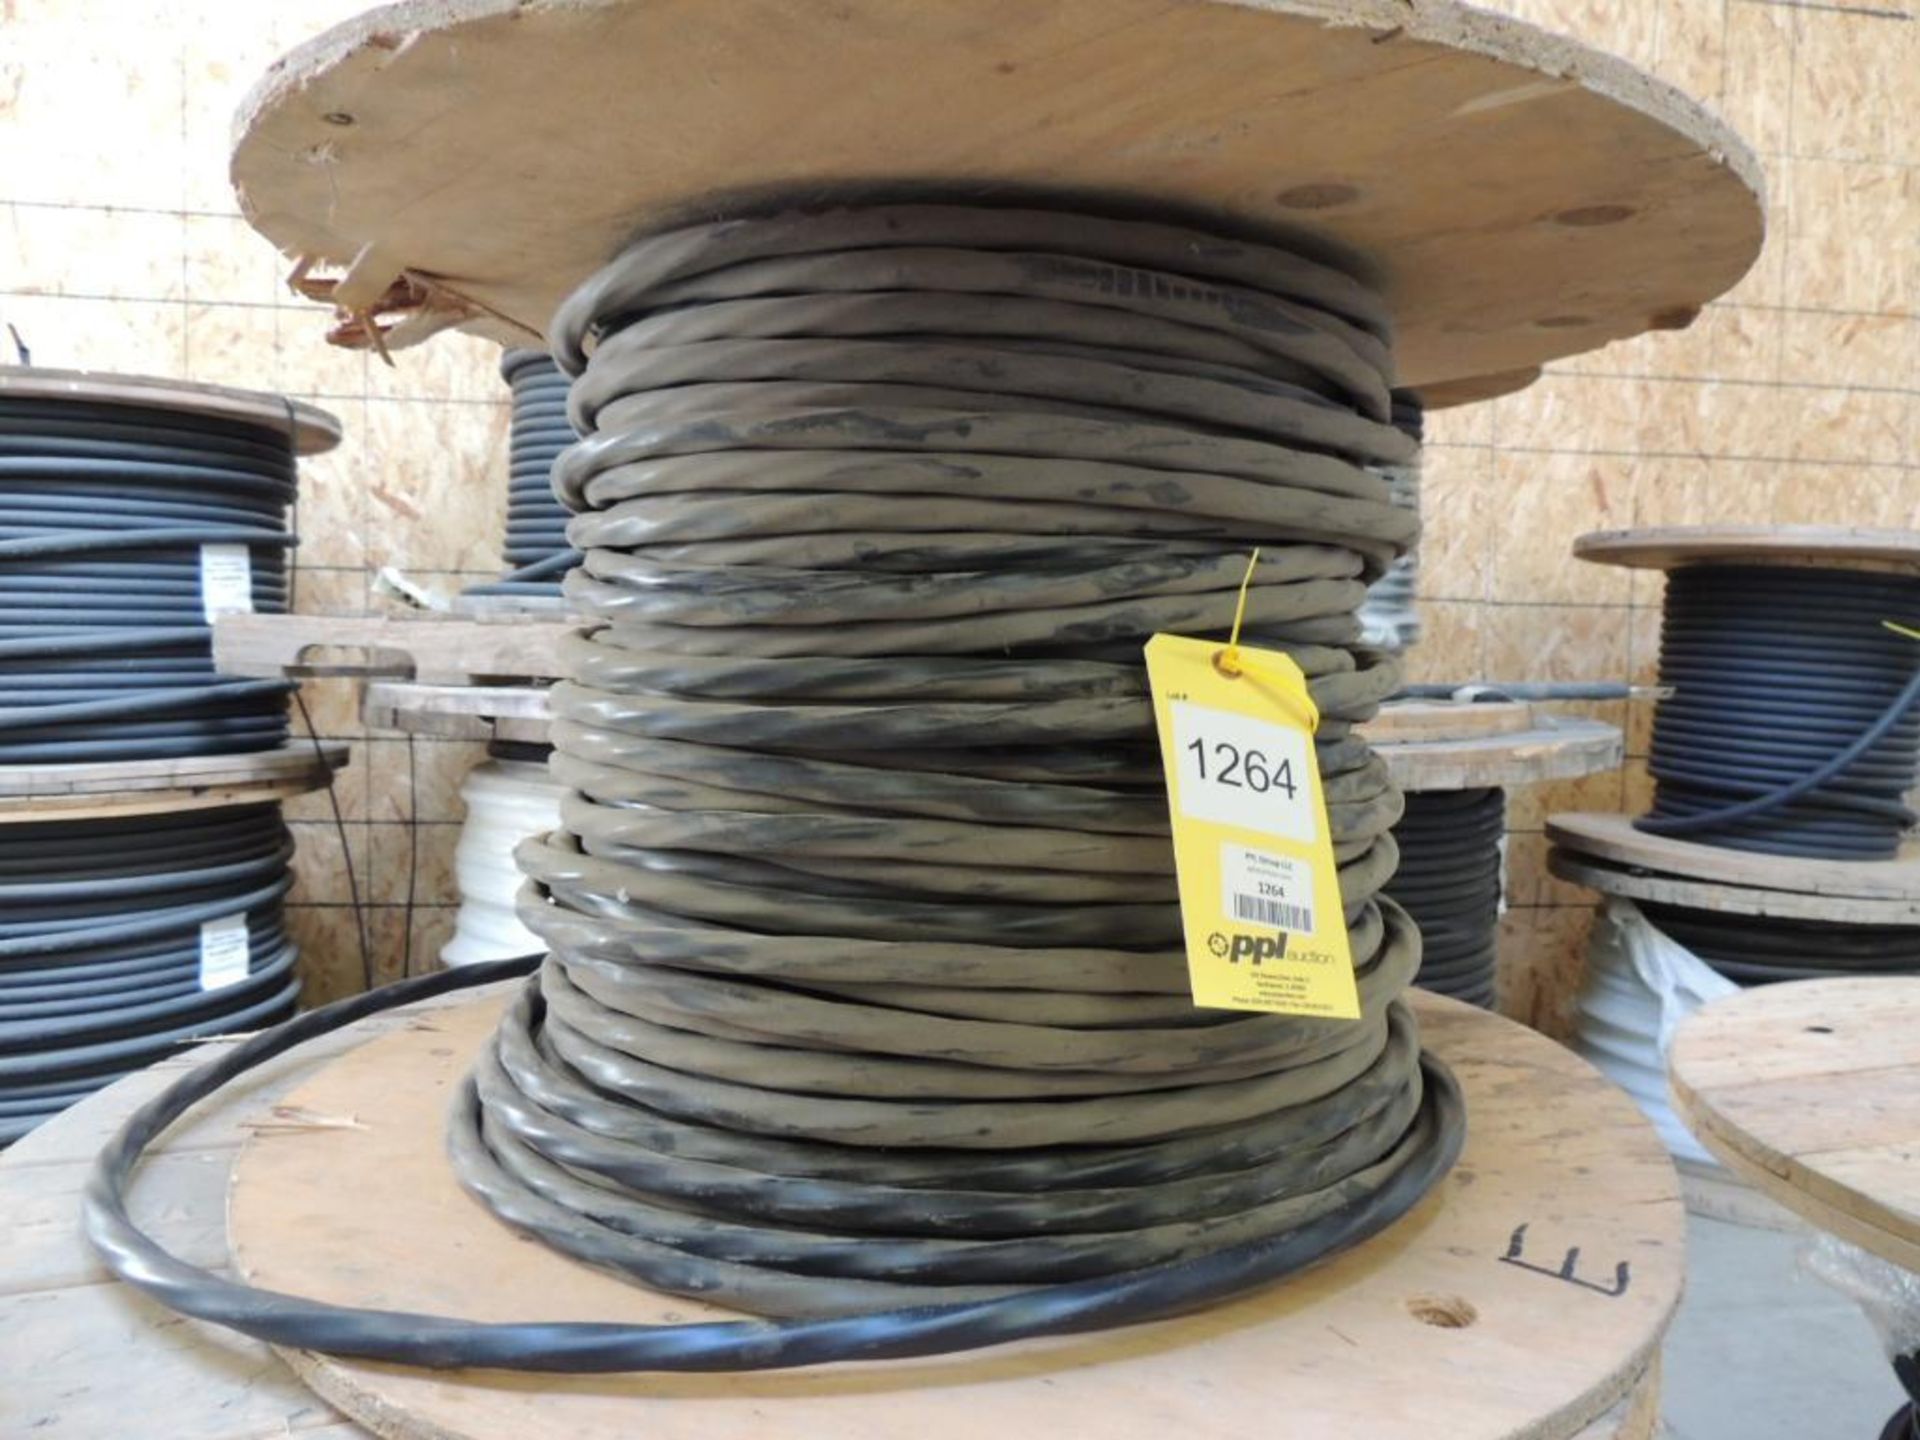 LOT: Approx. 500 ft. 1268 Multi Wire 4 Conductor with Ground, 8 ga. THHN